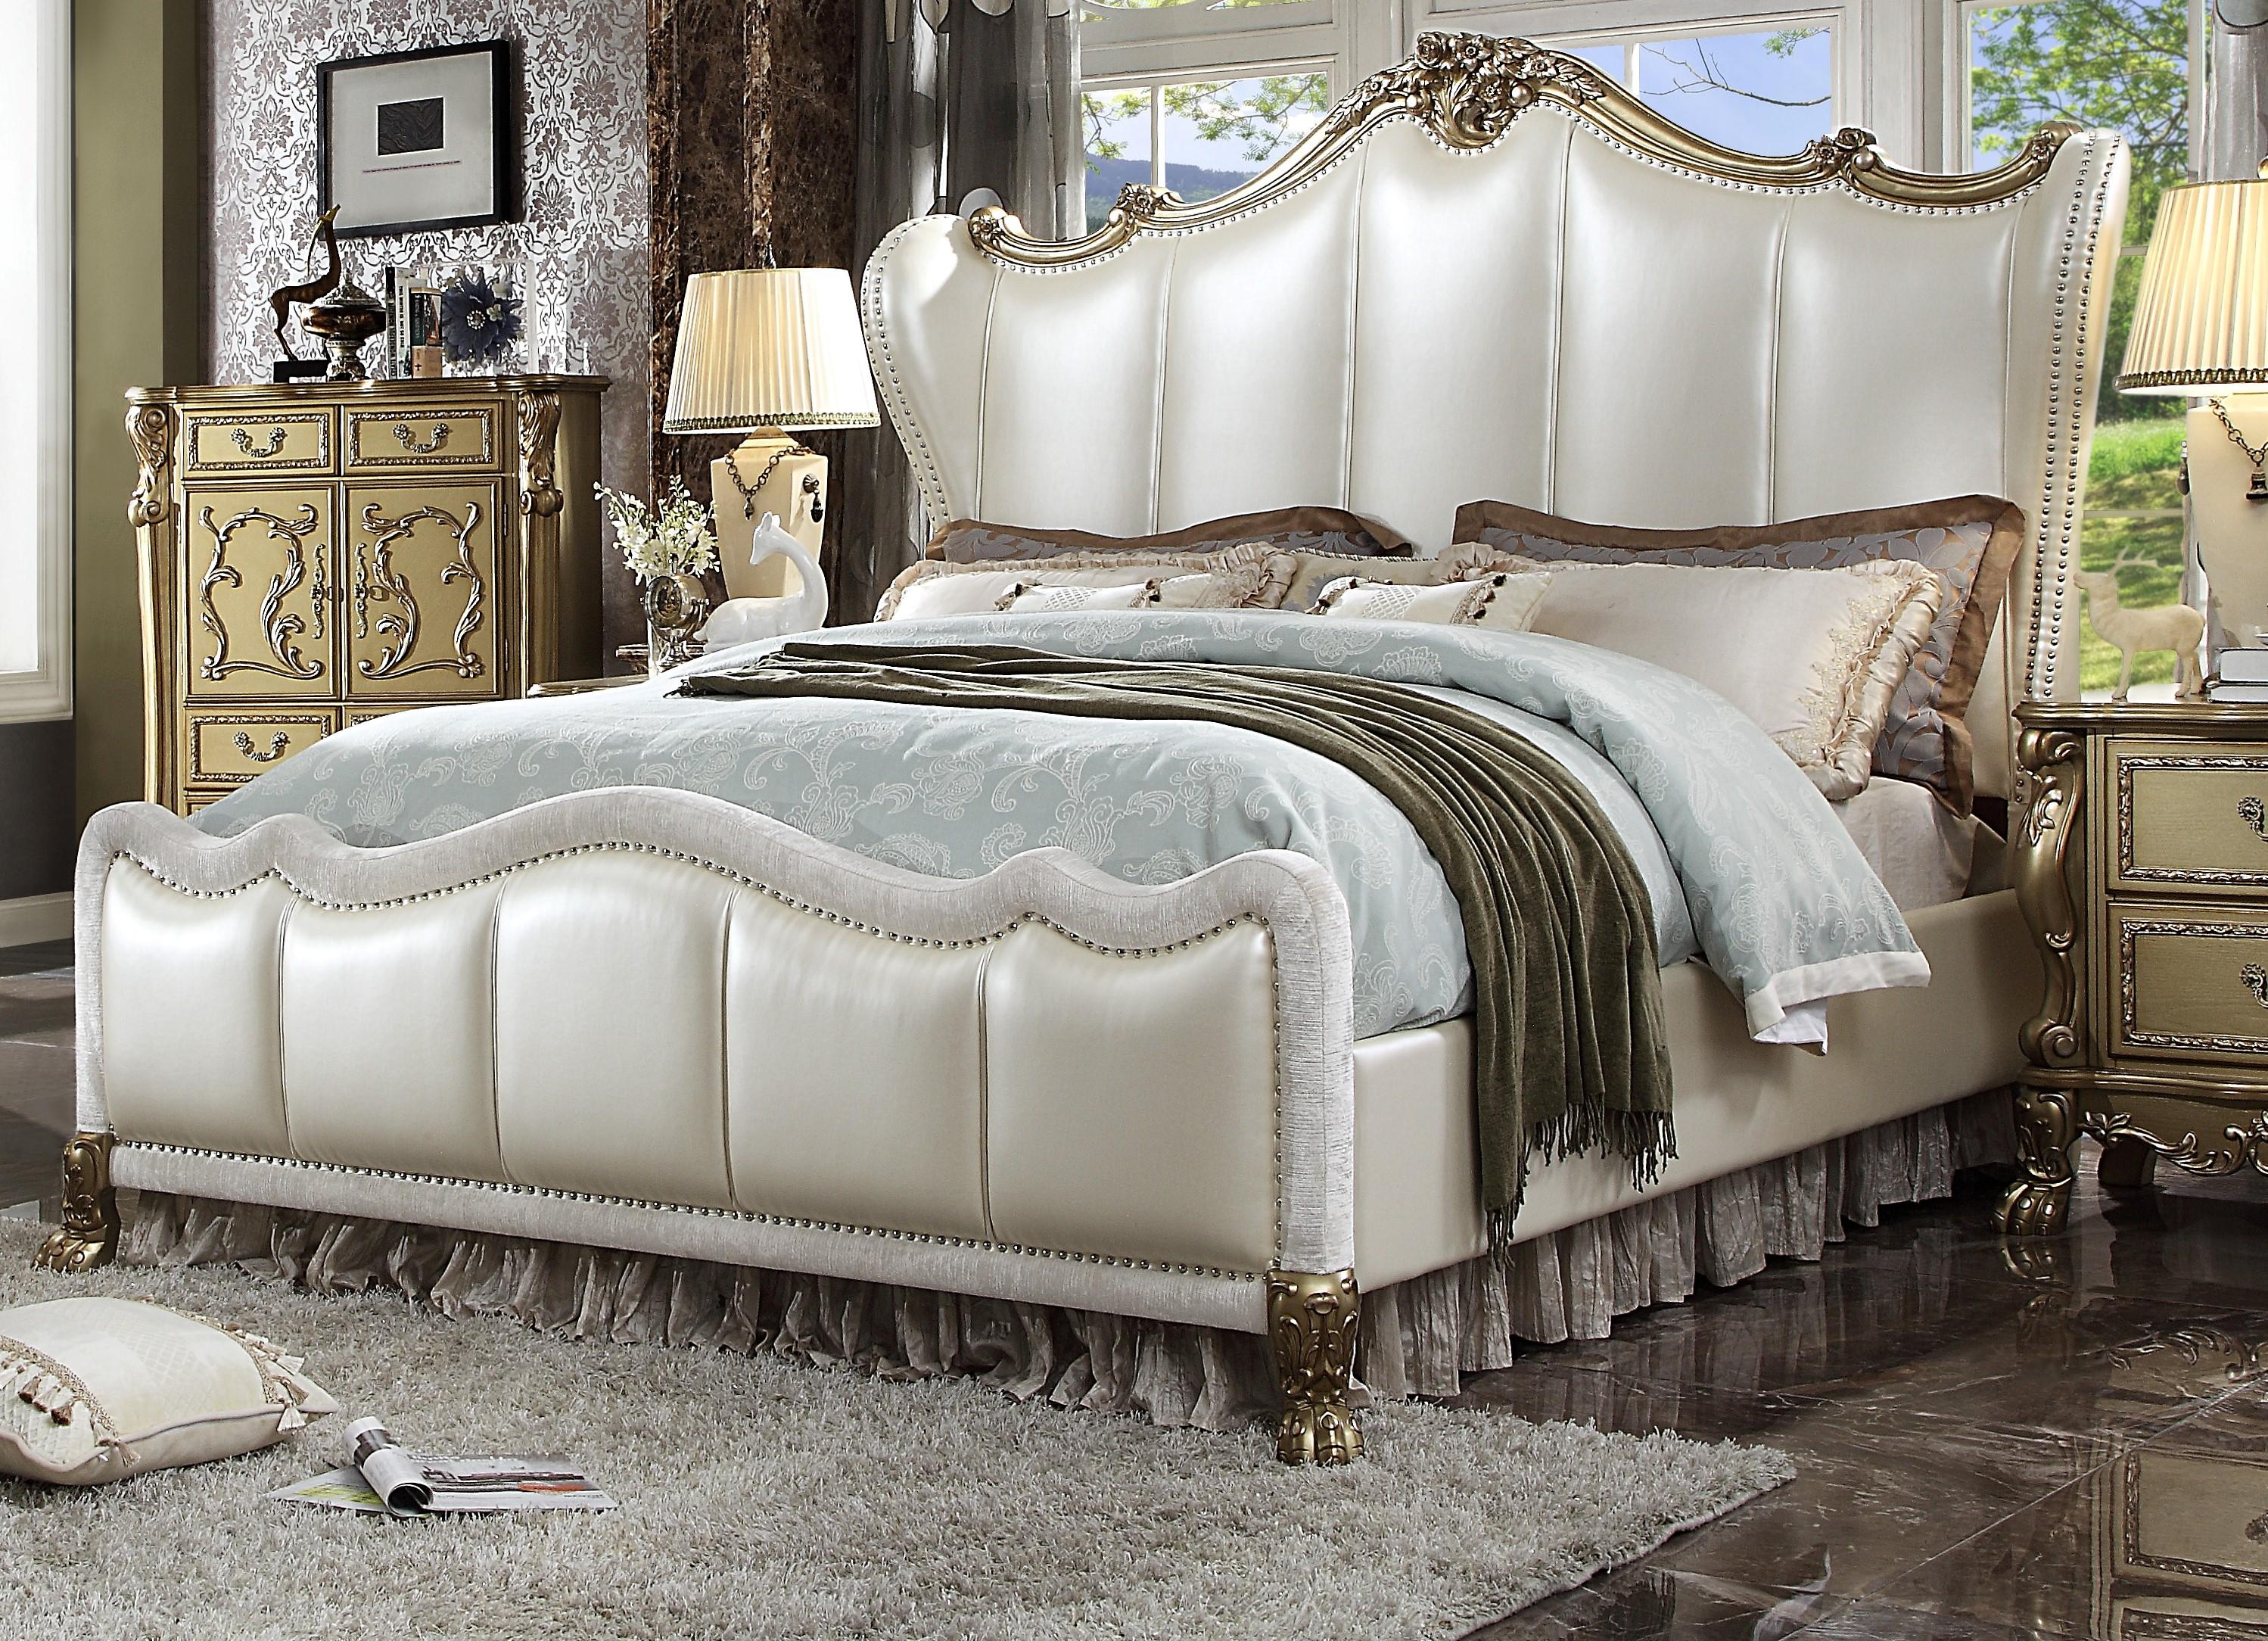 

    
Tufted Pearl White & Gold Patina Queen Bed Dresden II-27820Q Acme Traditional
